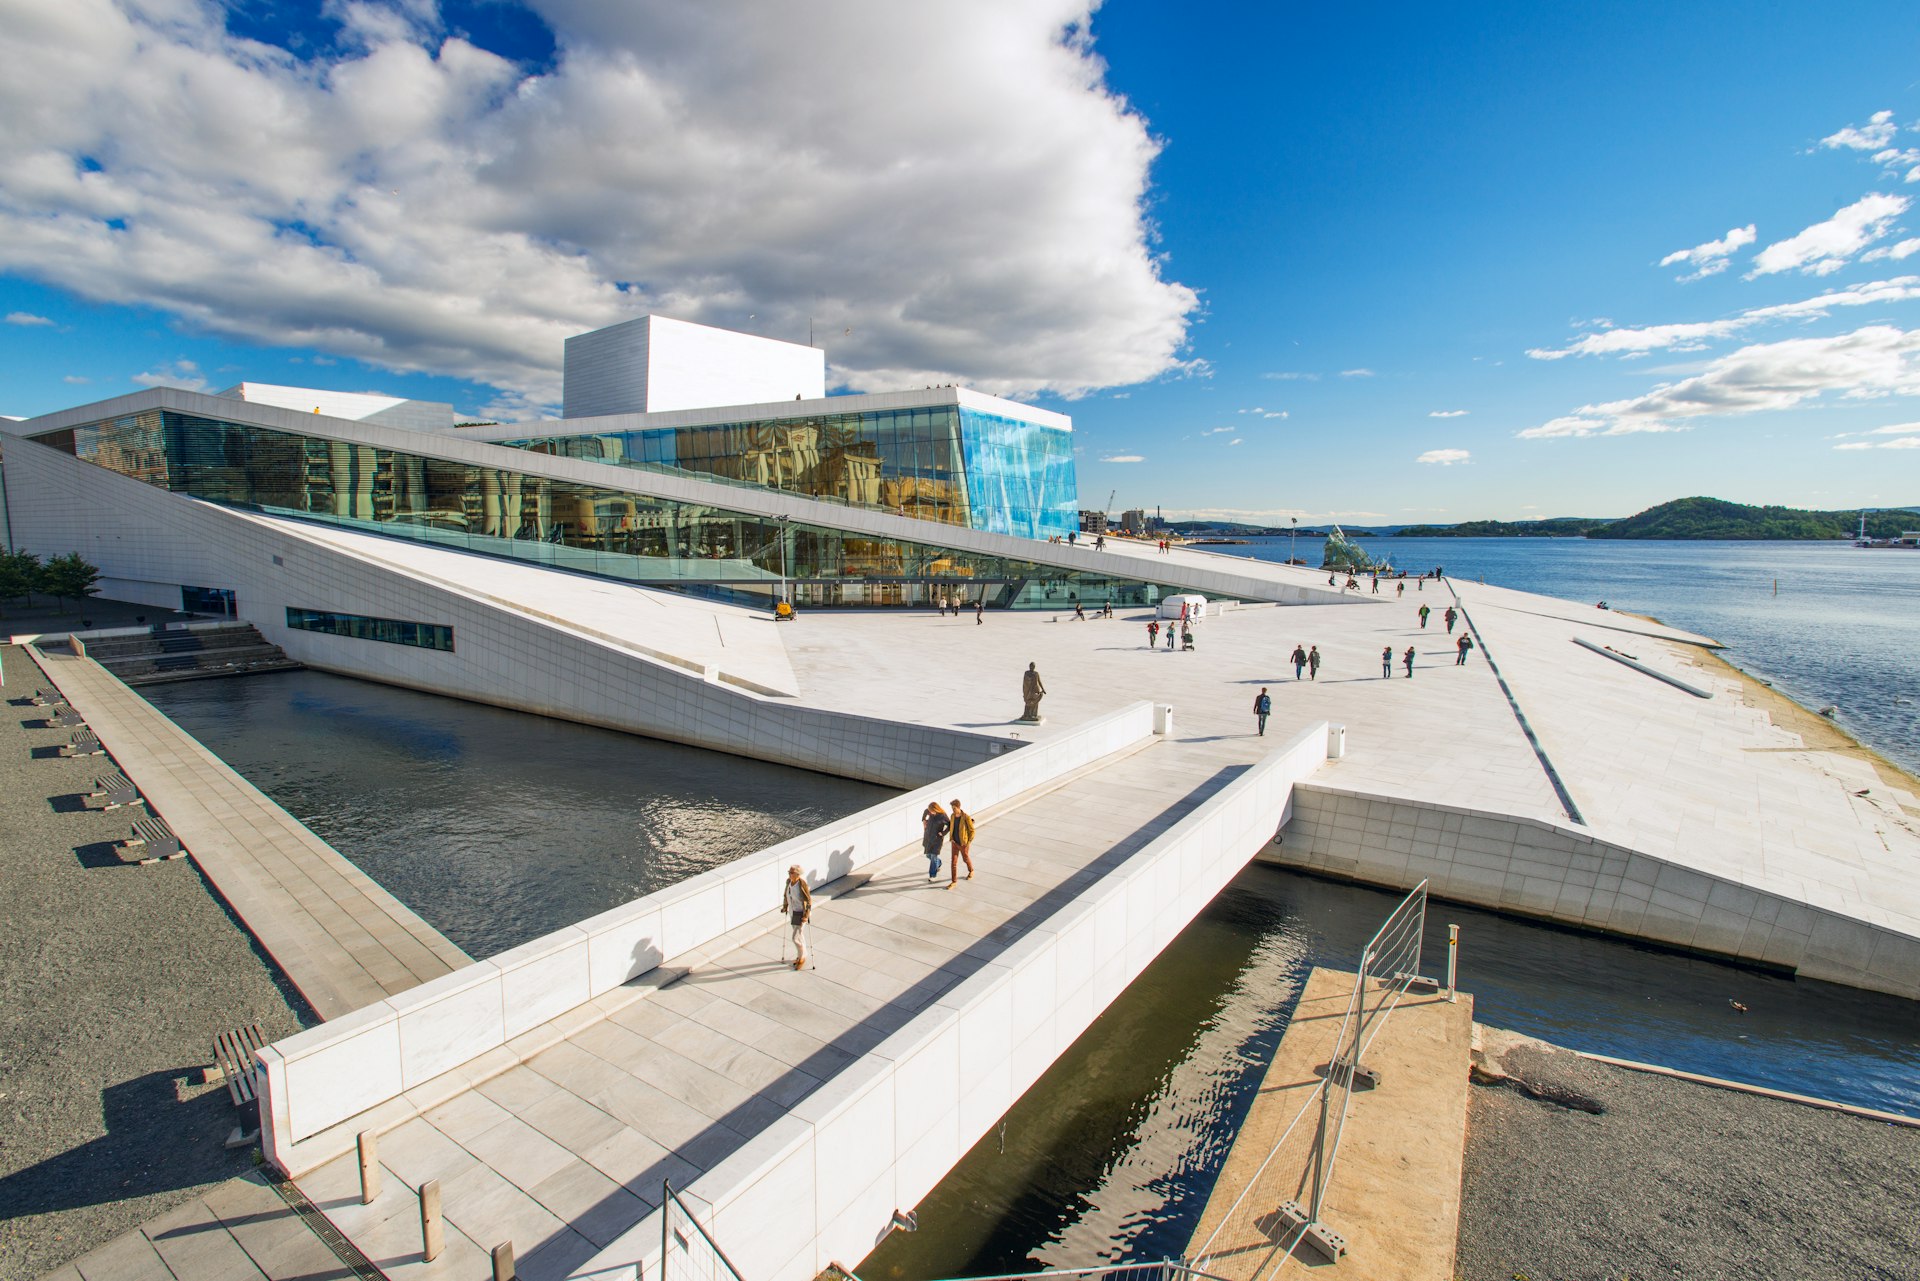 View on a side of the National Oslo Opera House, a white building in Oslo with a 'ramped' design that allows visitors to walk all over it.